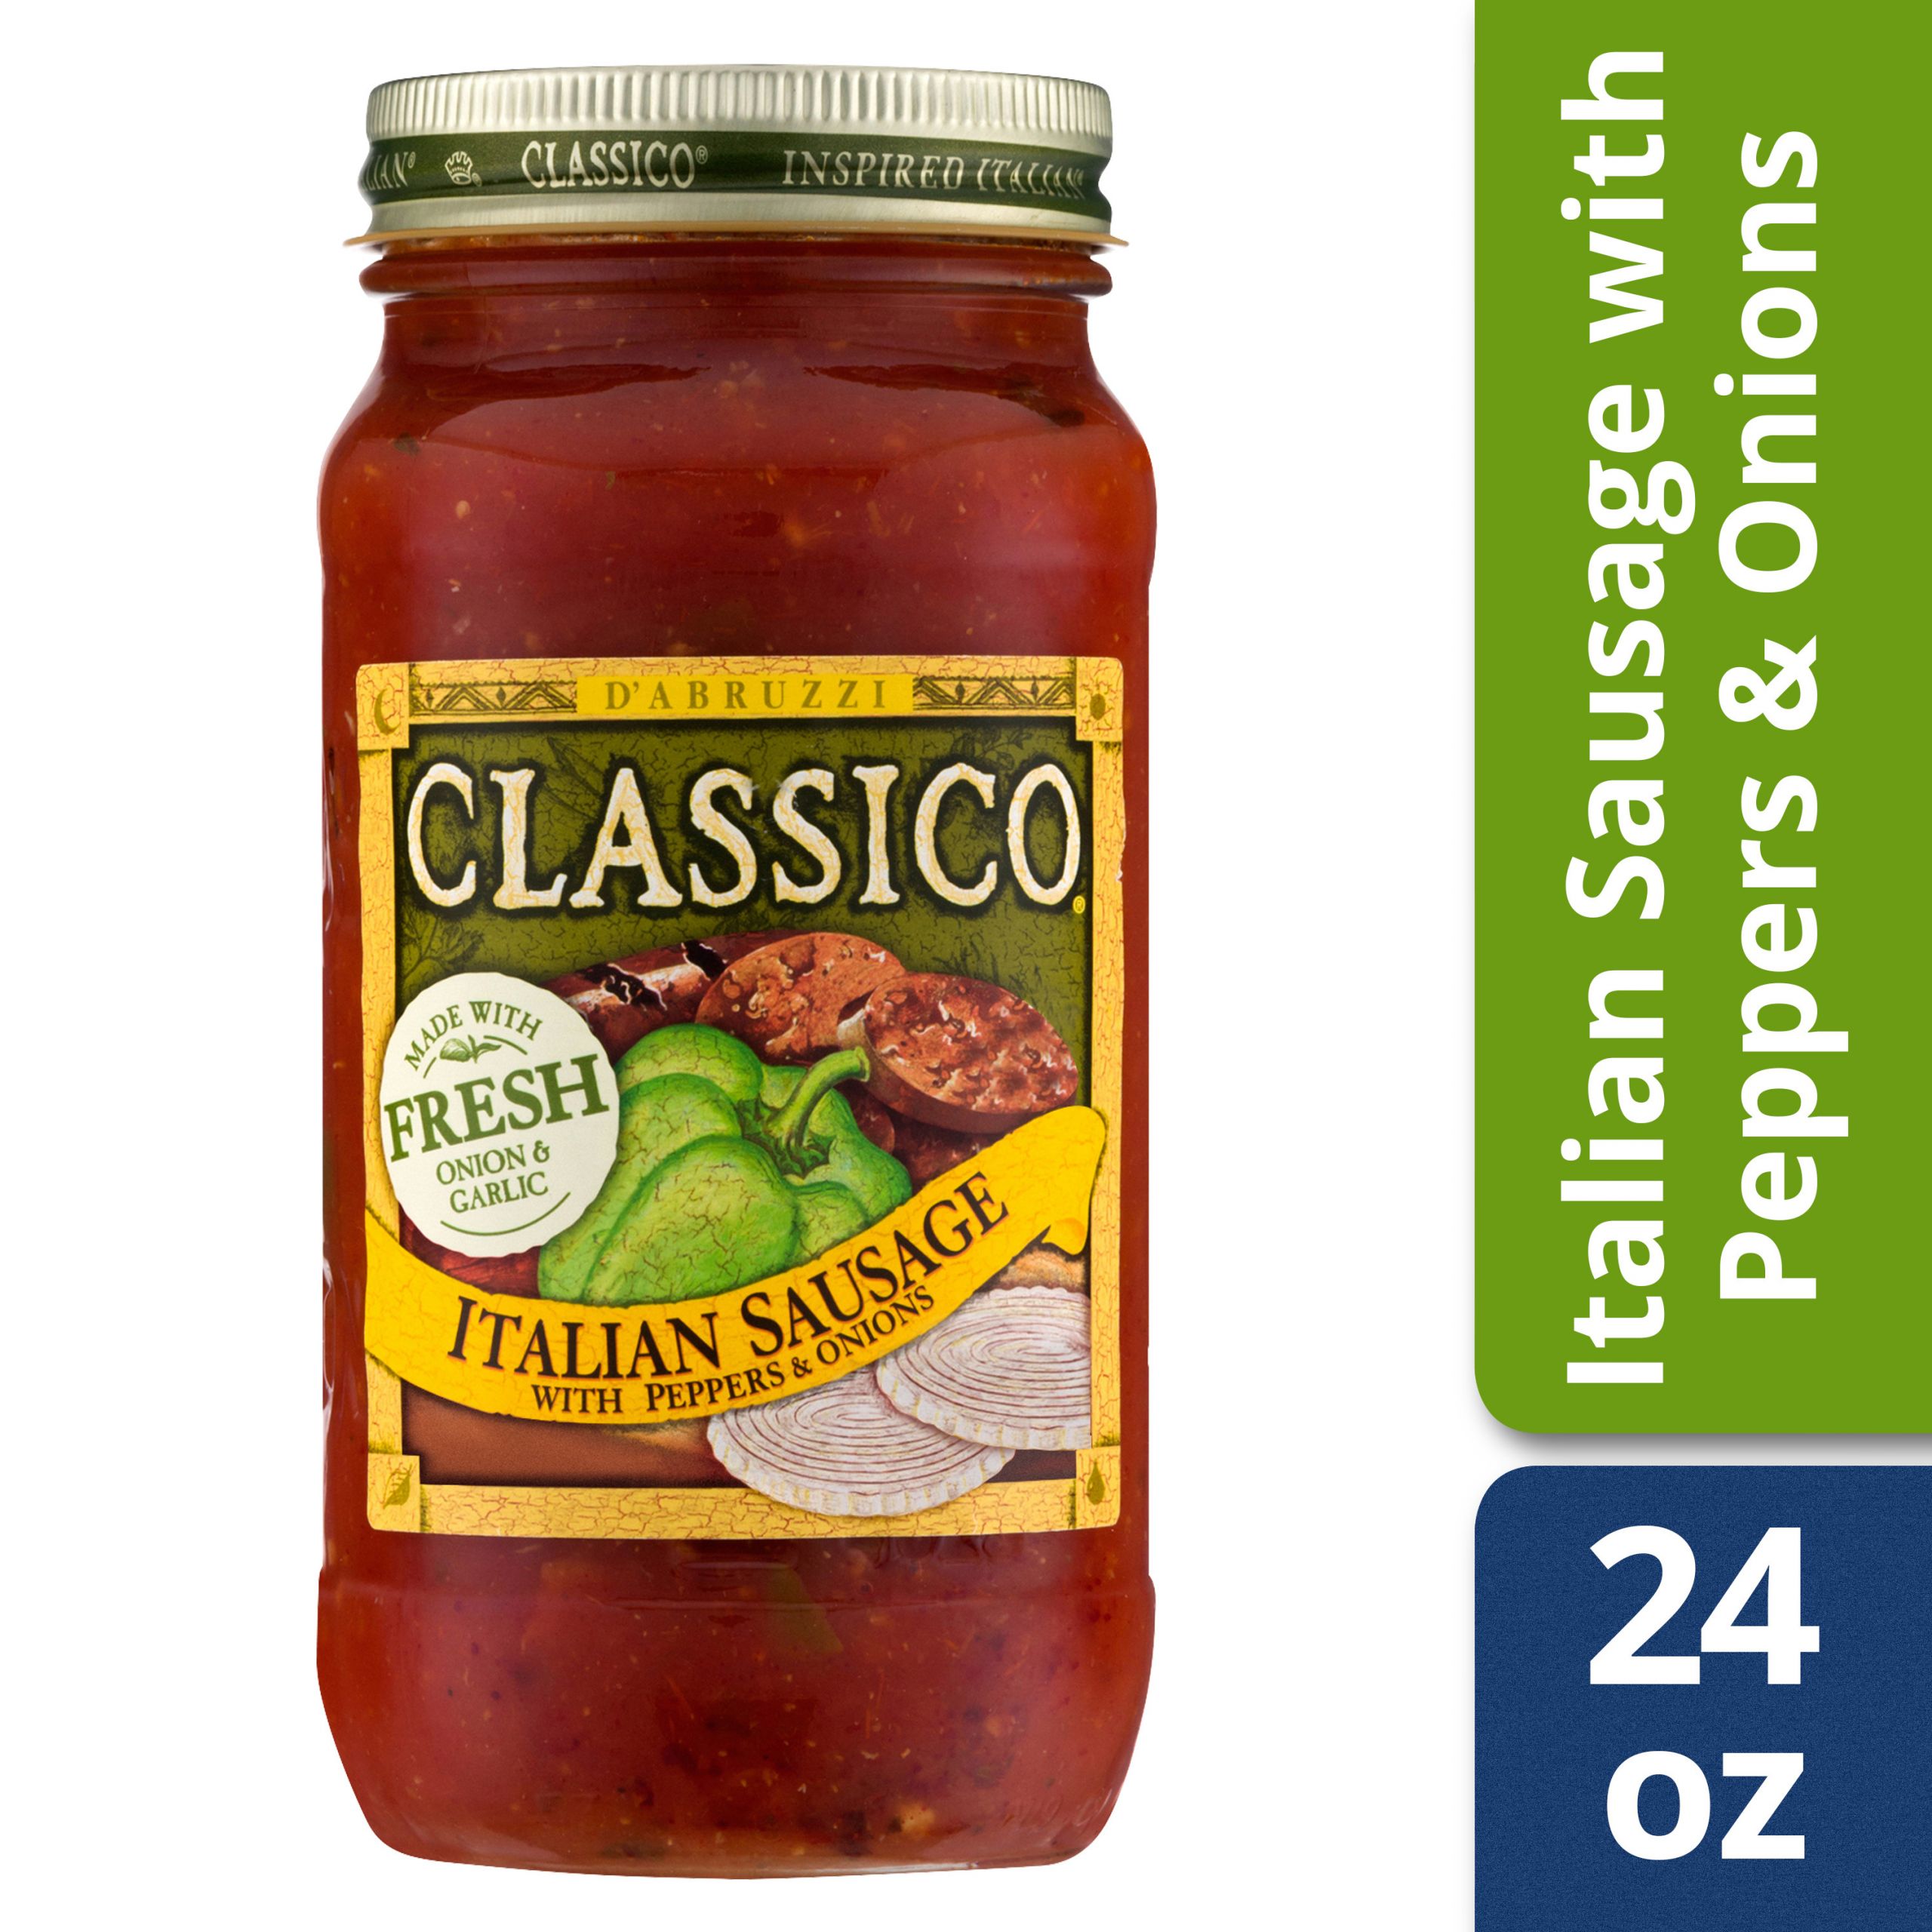 Classico Spaghetti Sauces
 Classico Italian Sausage with Peppers and ions Pasta